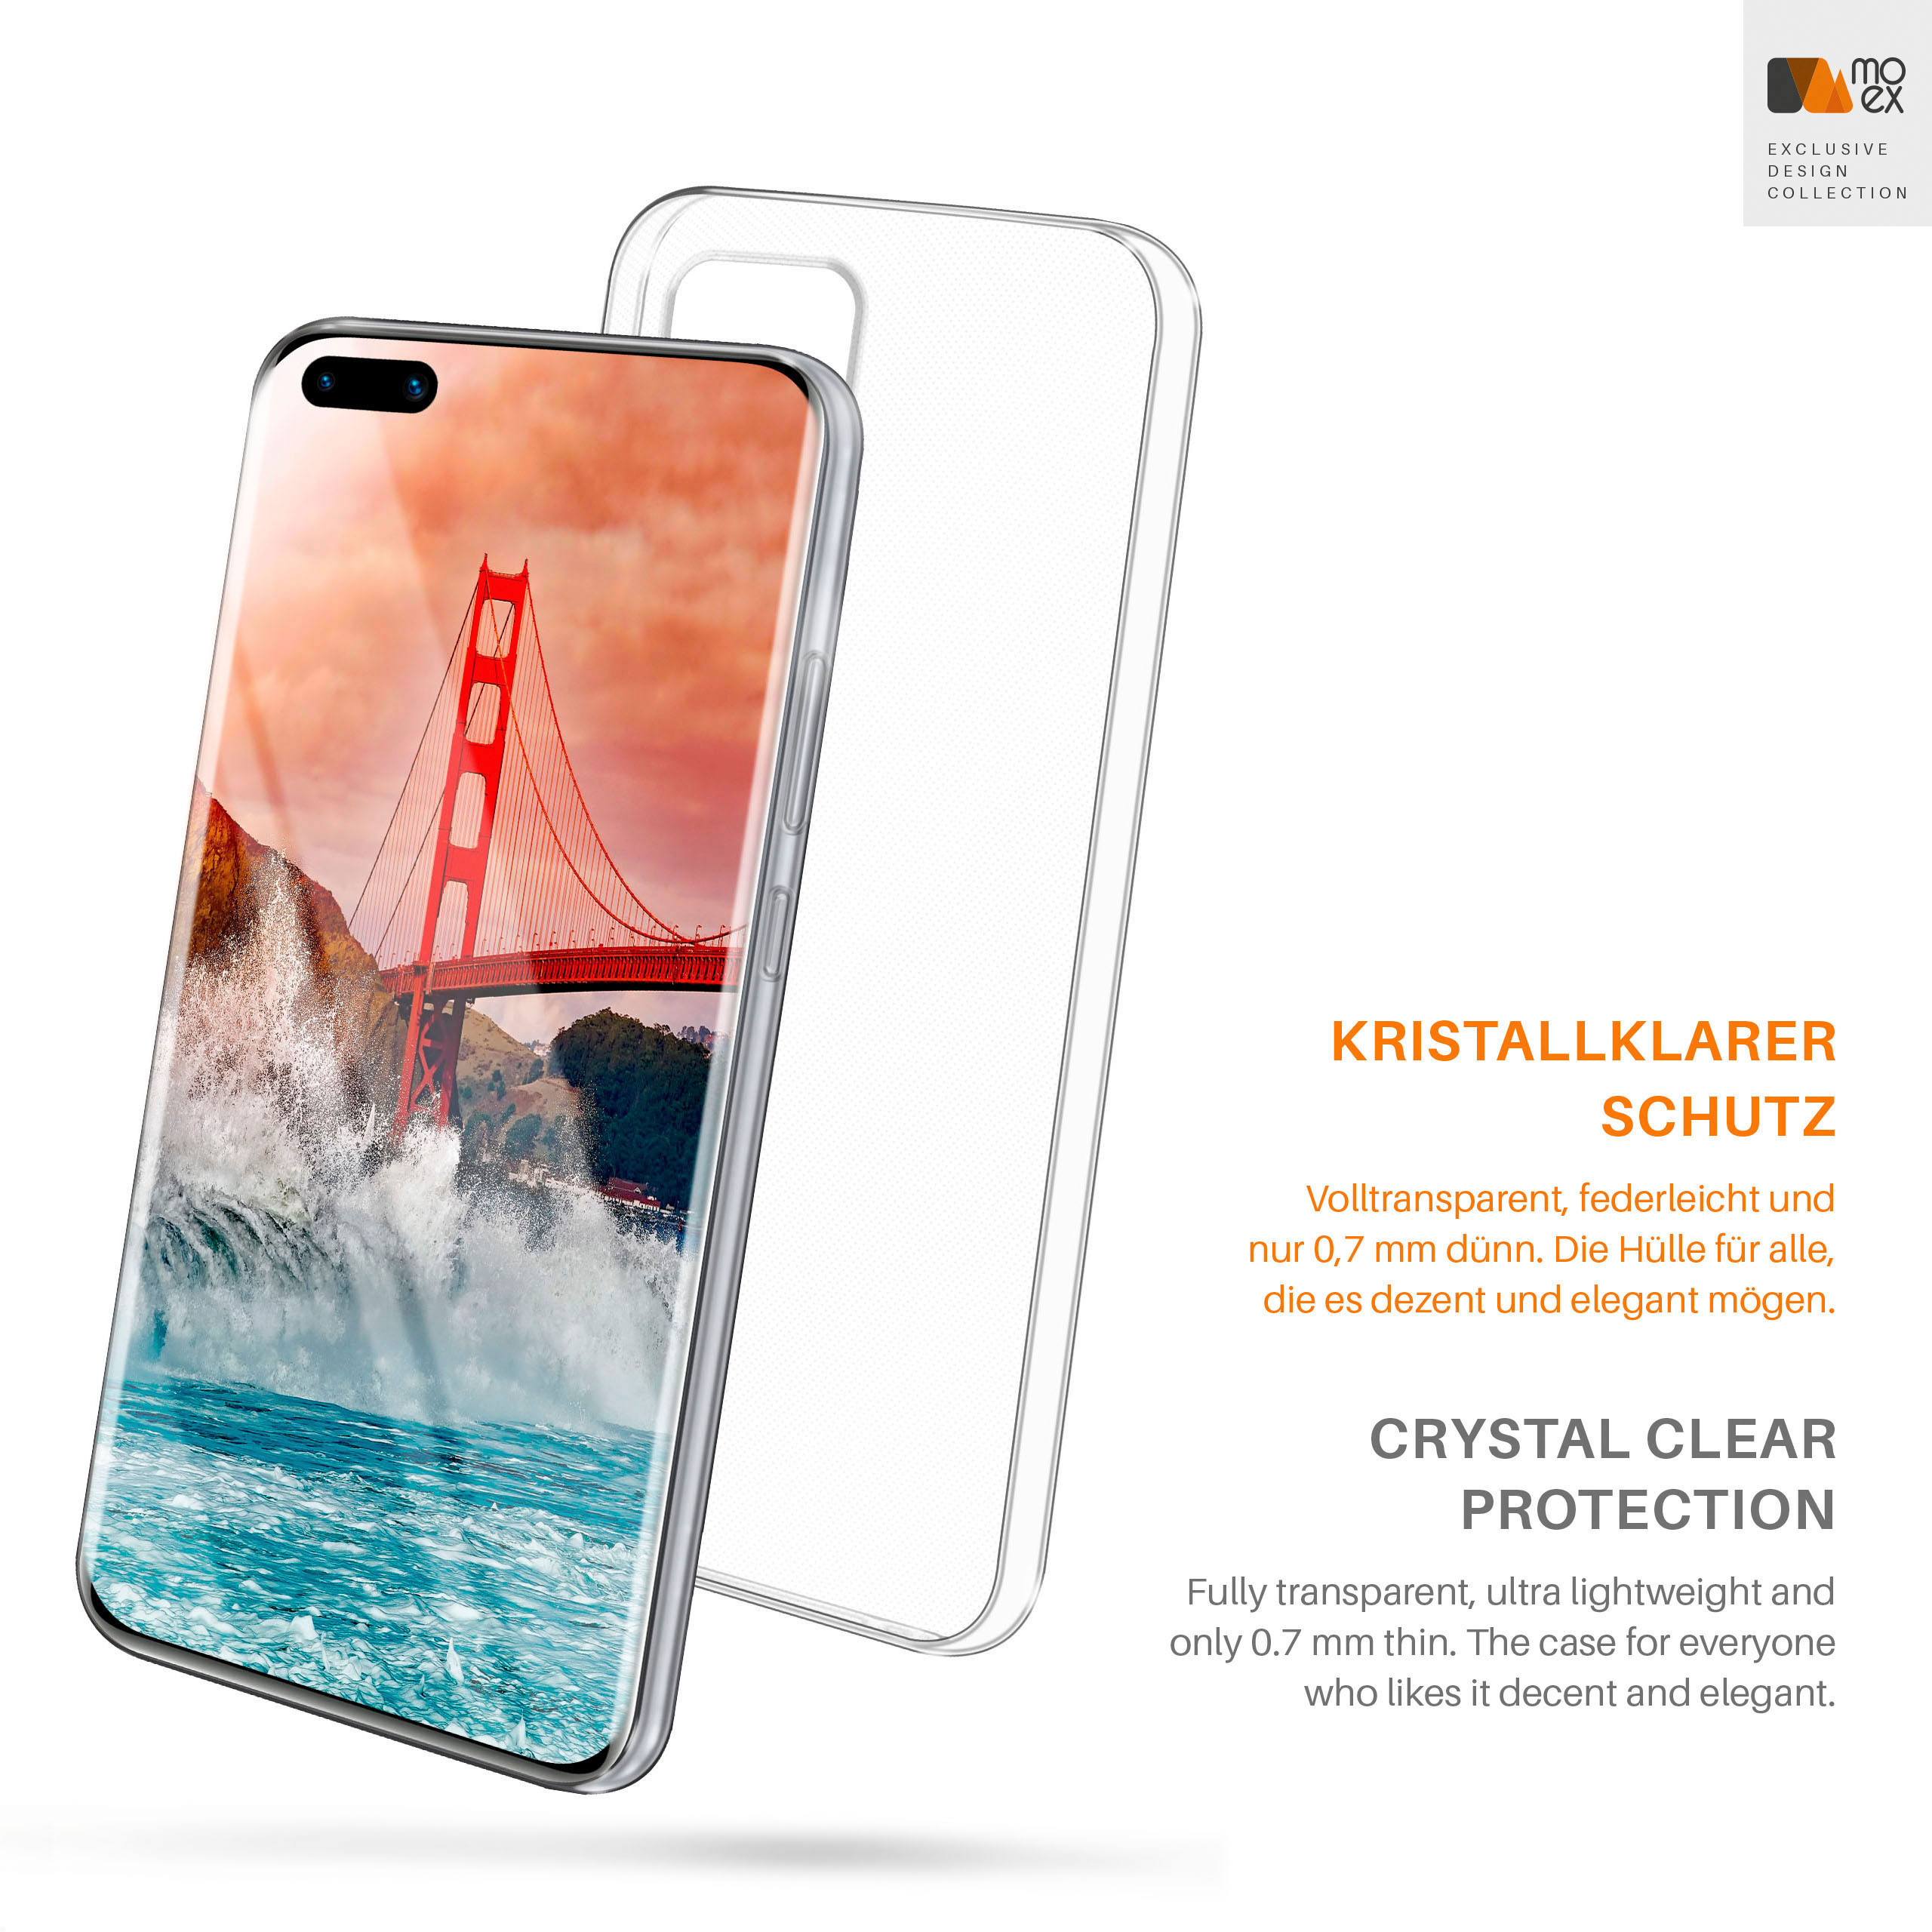 MOEX Backcover, P40, Crystal-Clear Case, Aero Huawei,